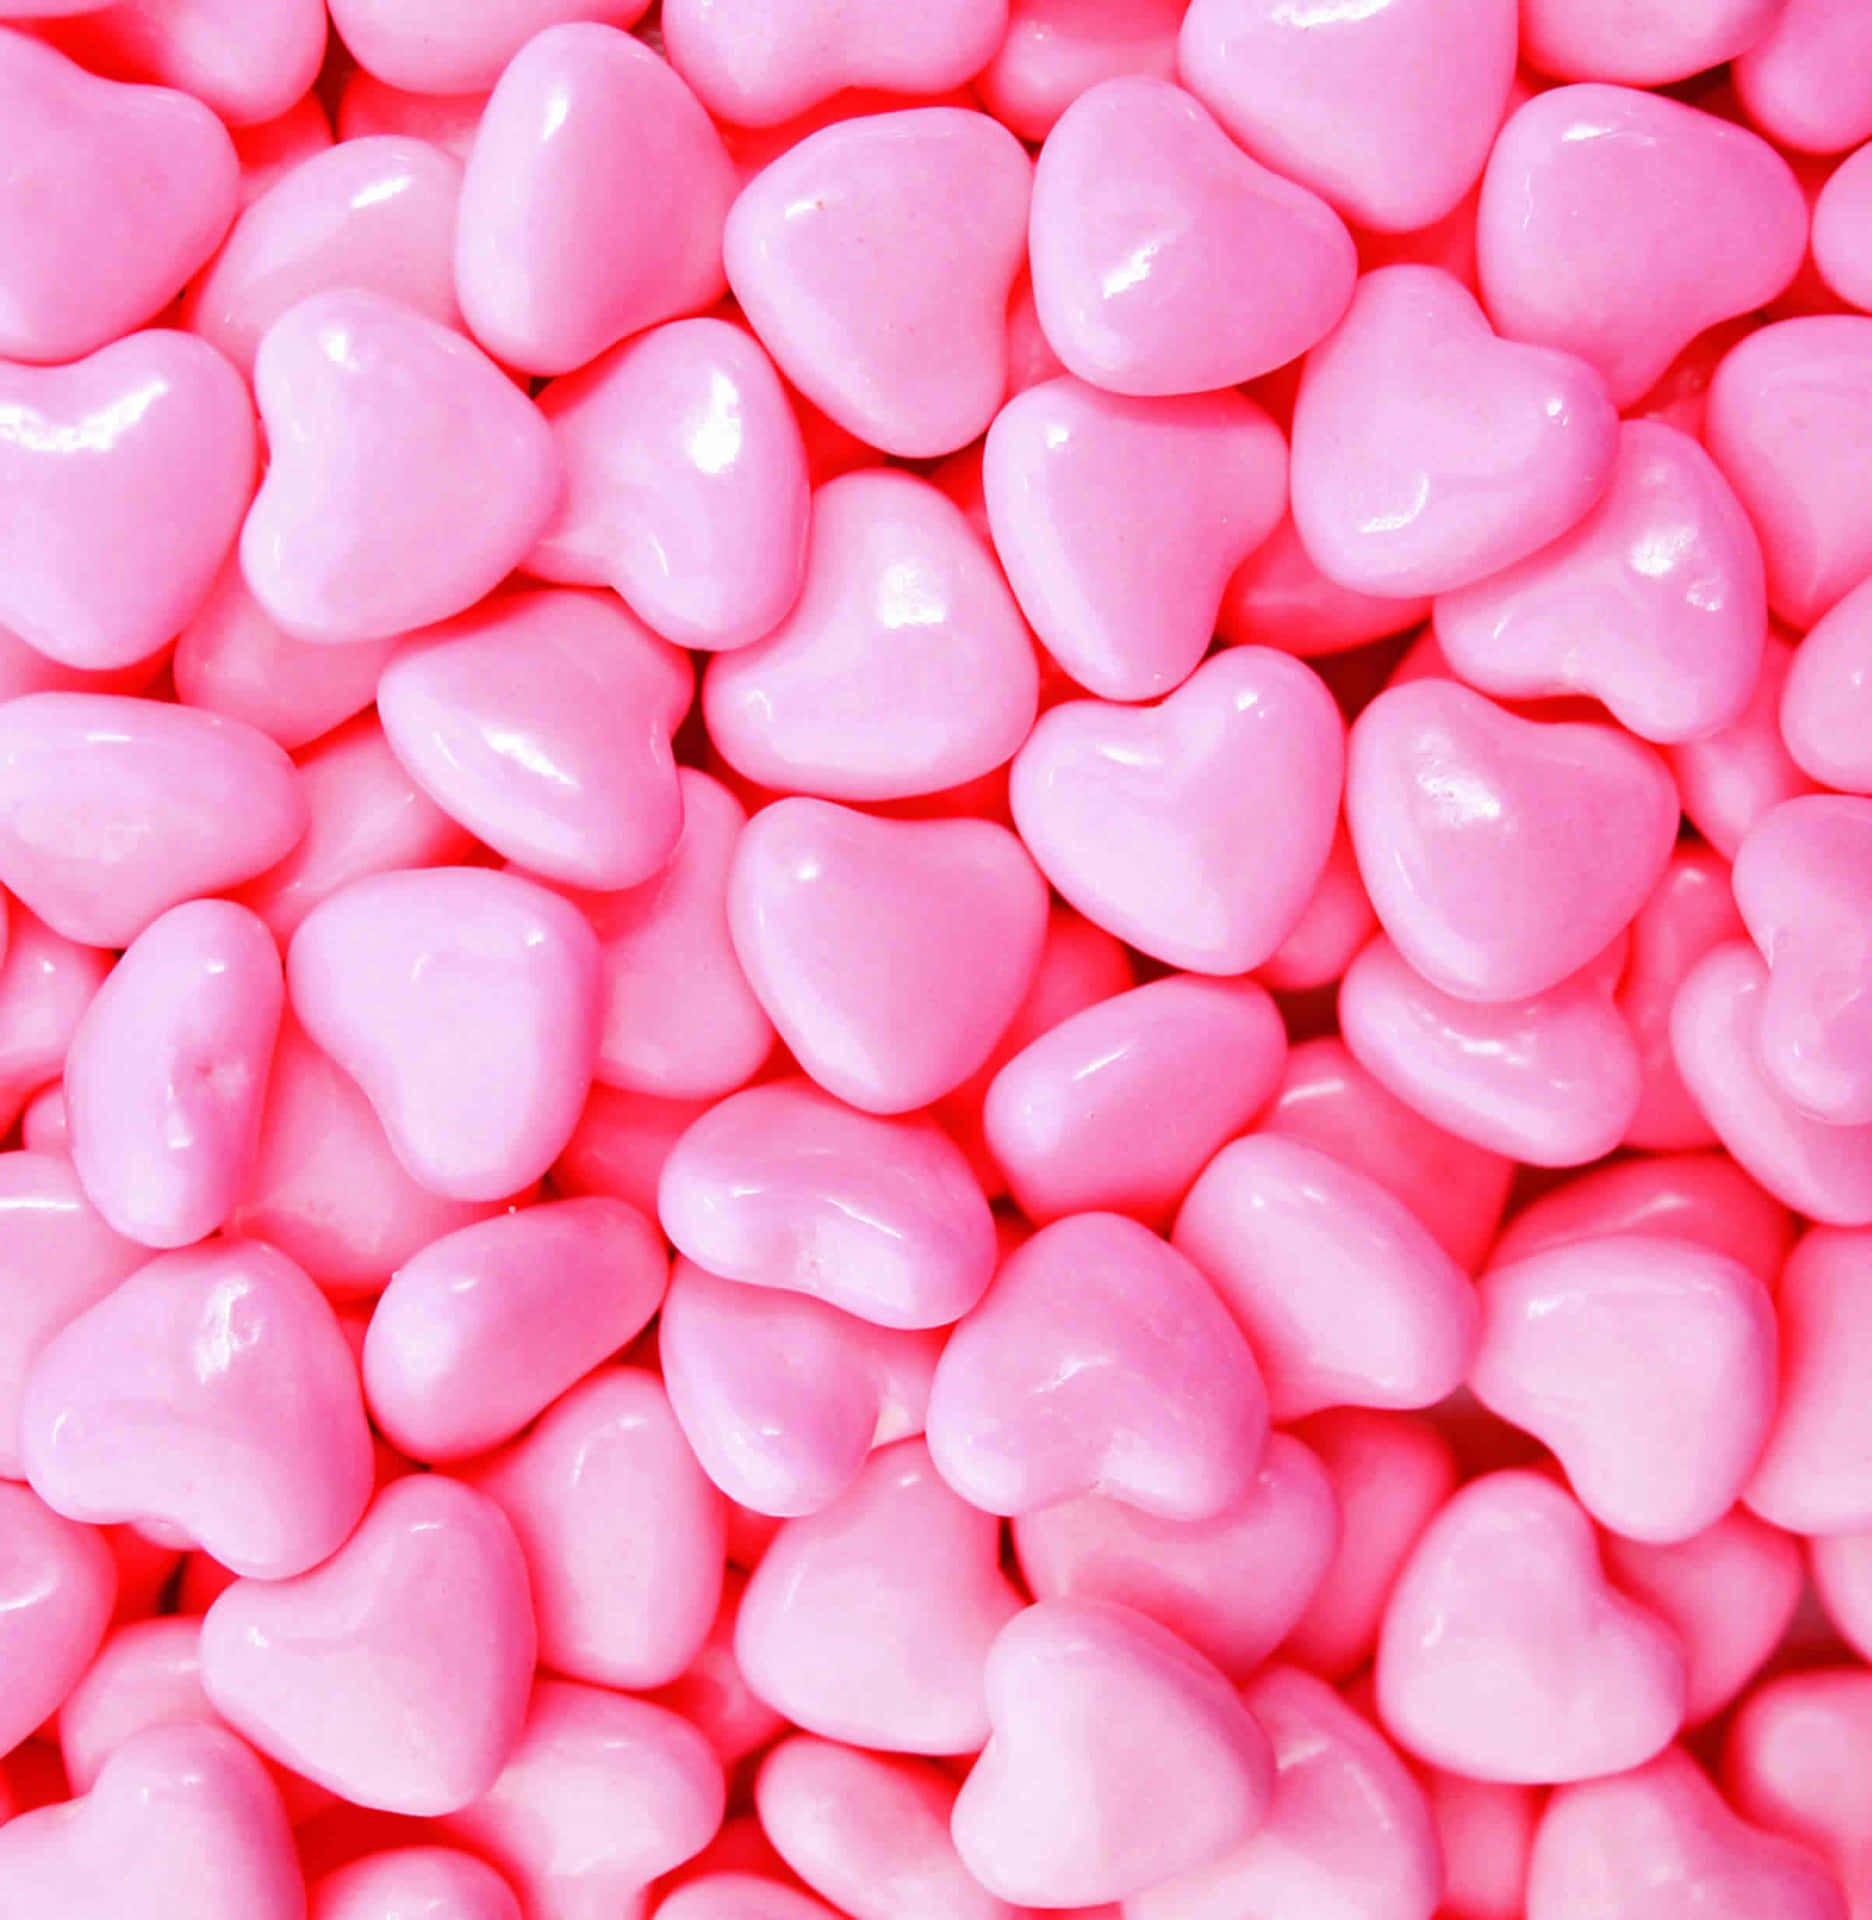 Delicious Pink Candies Scattered on a surface Wallpaper